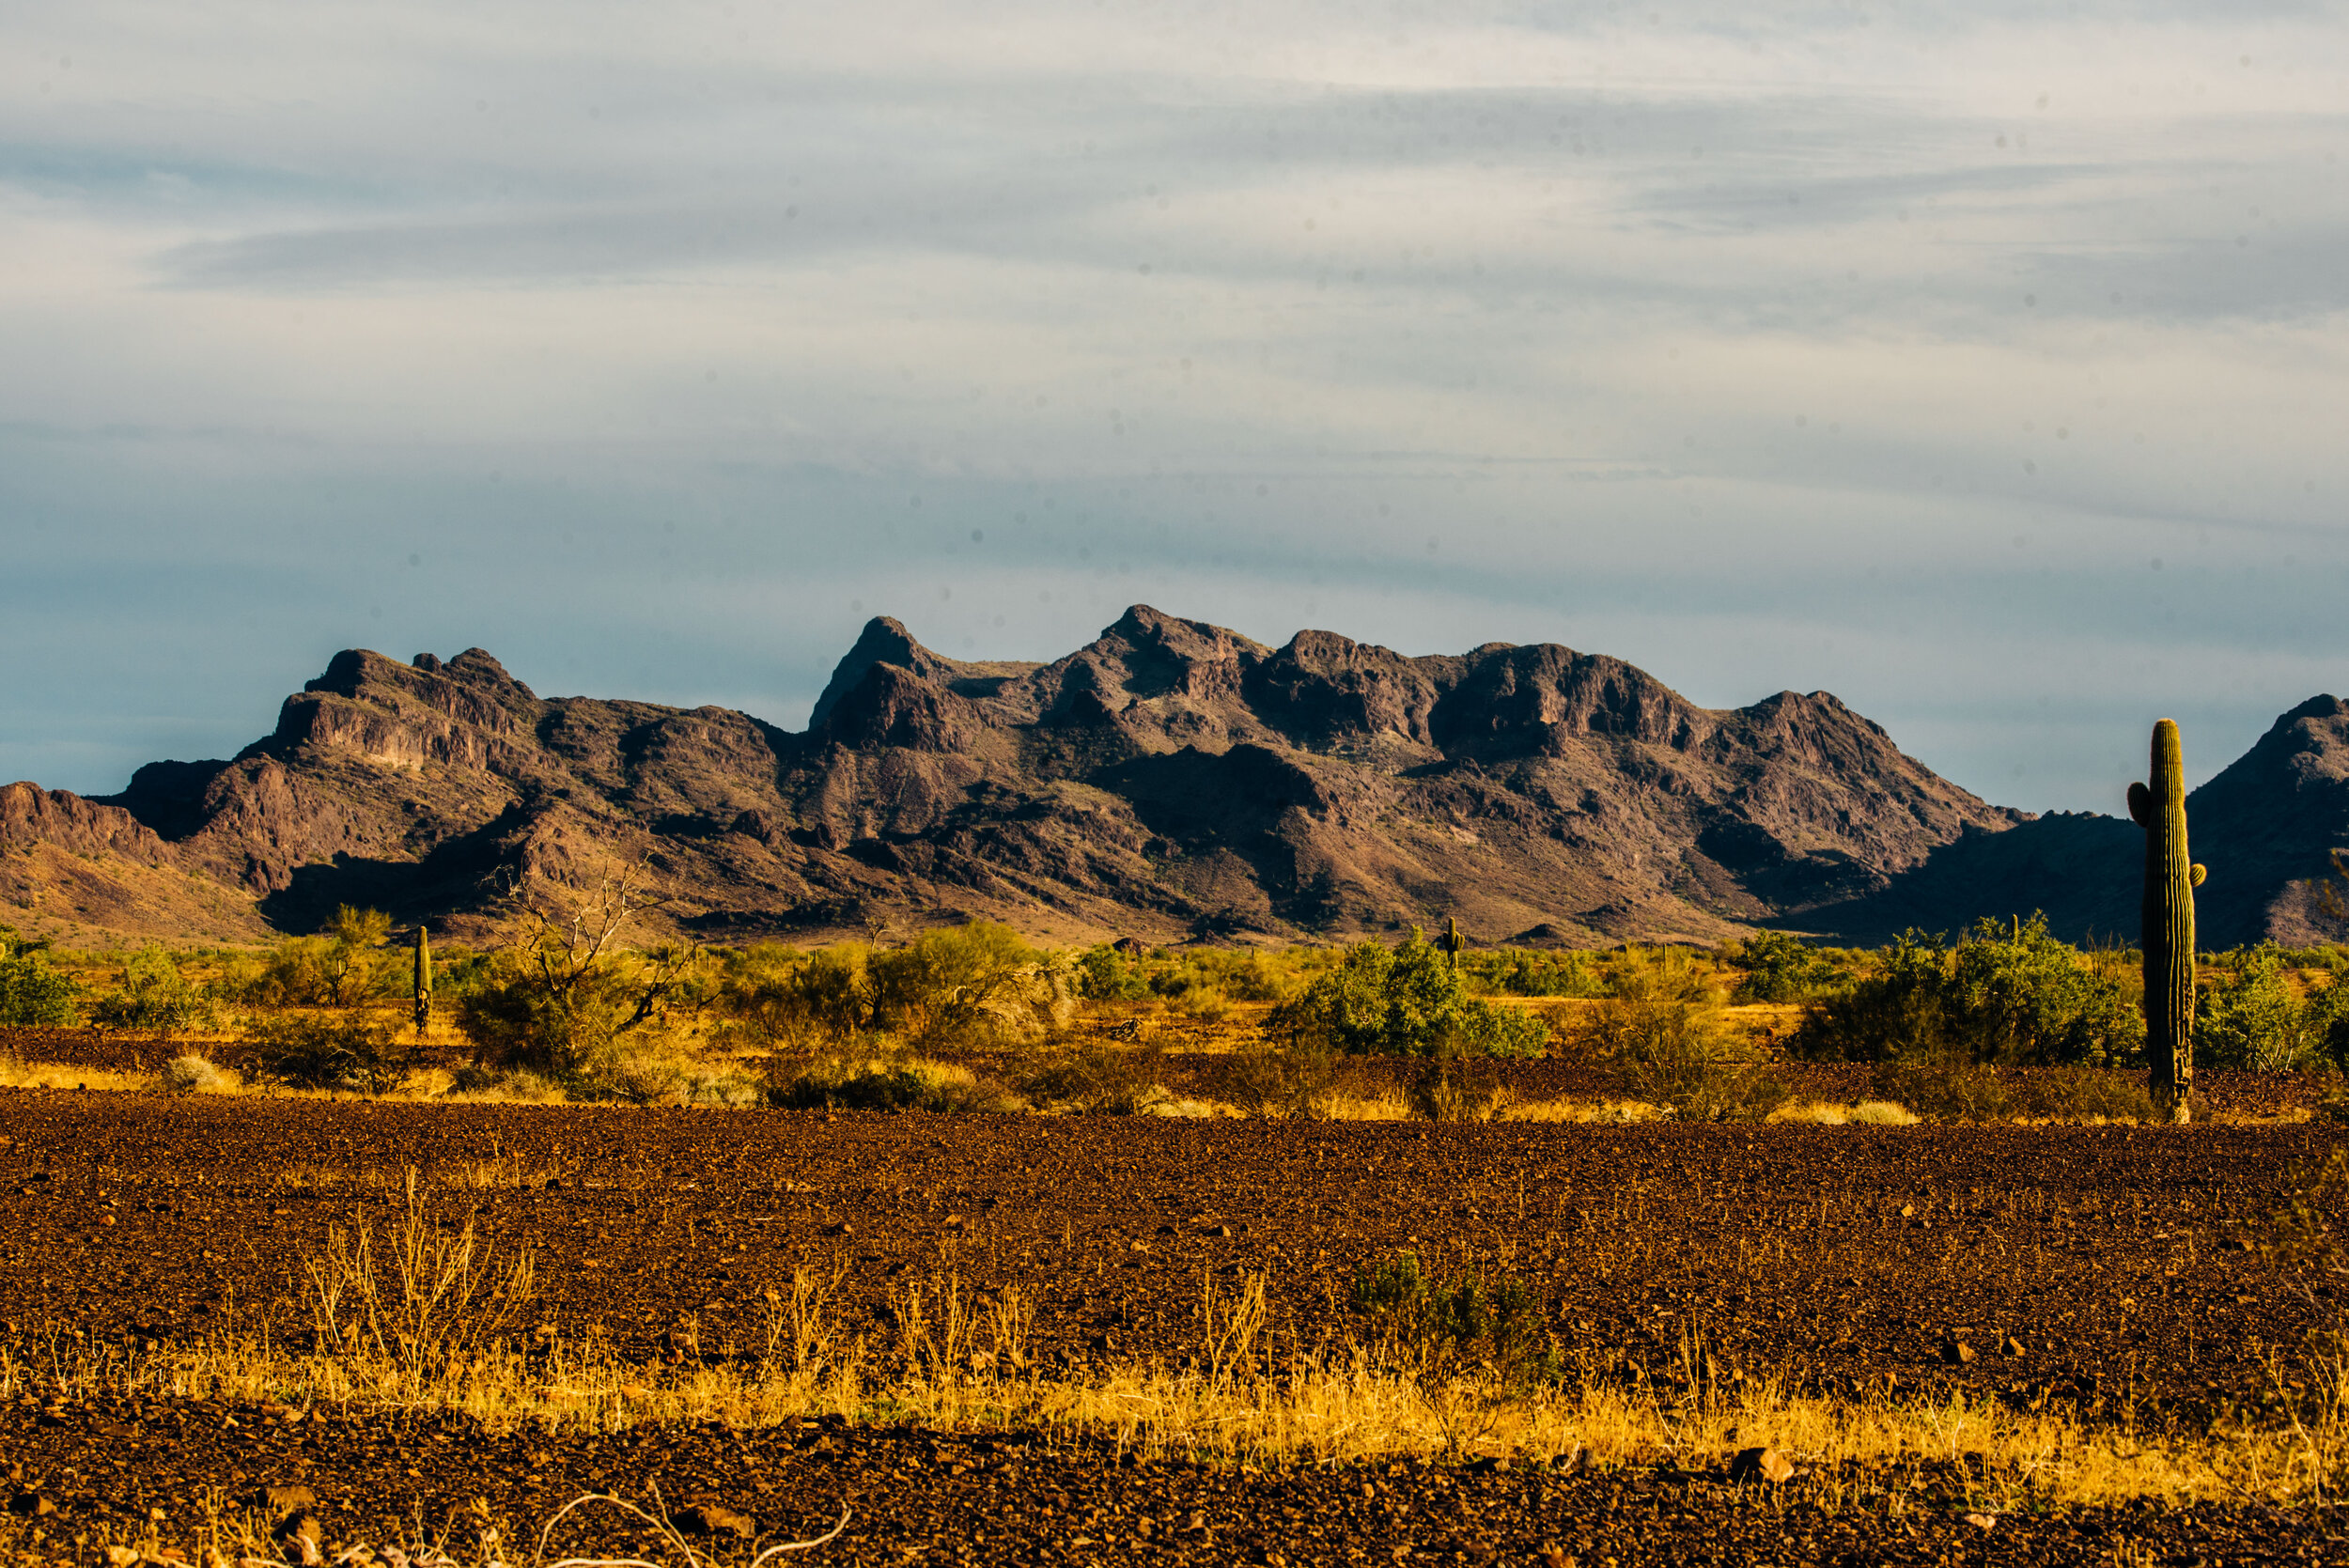  The mountains off in the distance in Quartzsite are so picturesque. 